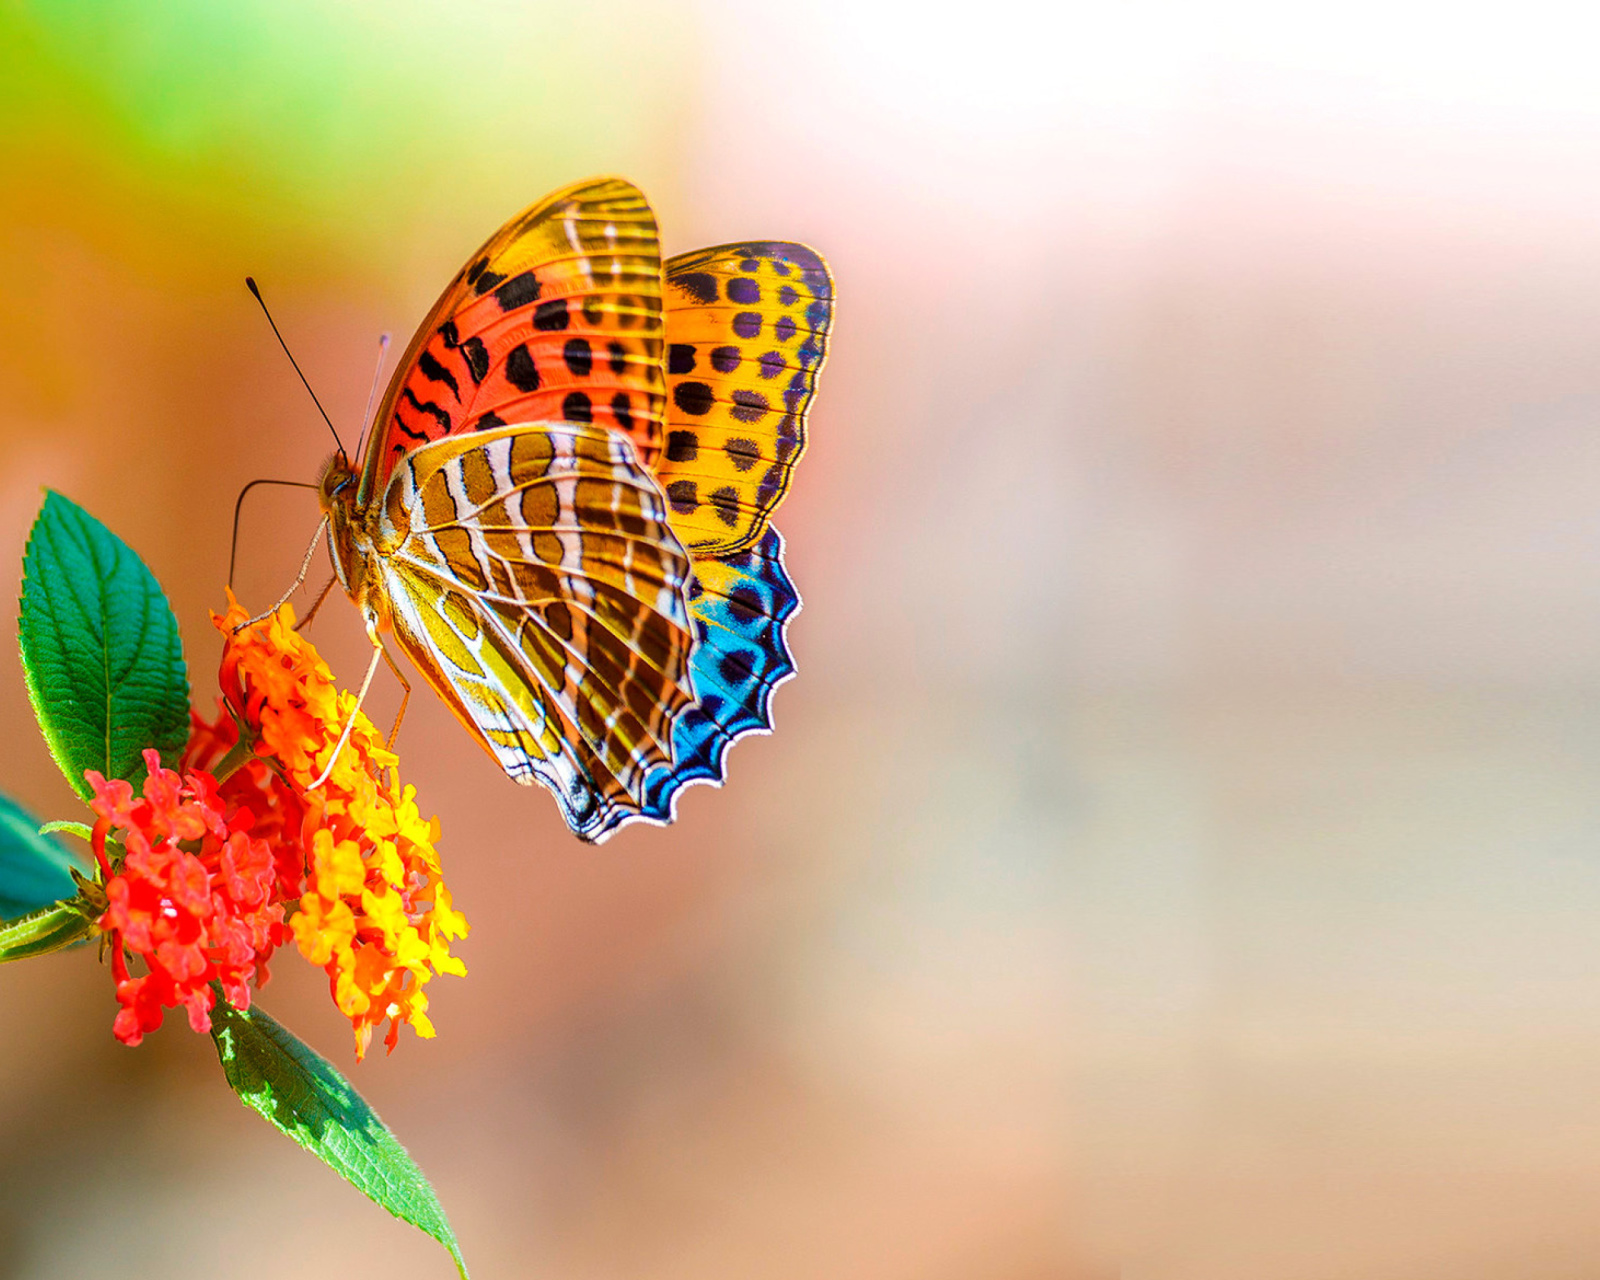 Colorful Animated Butterfly screenshot #1 1600x1280